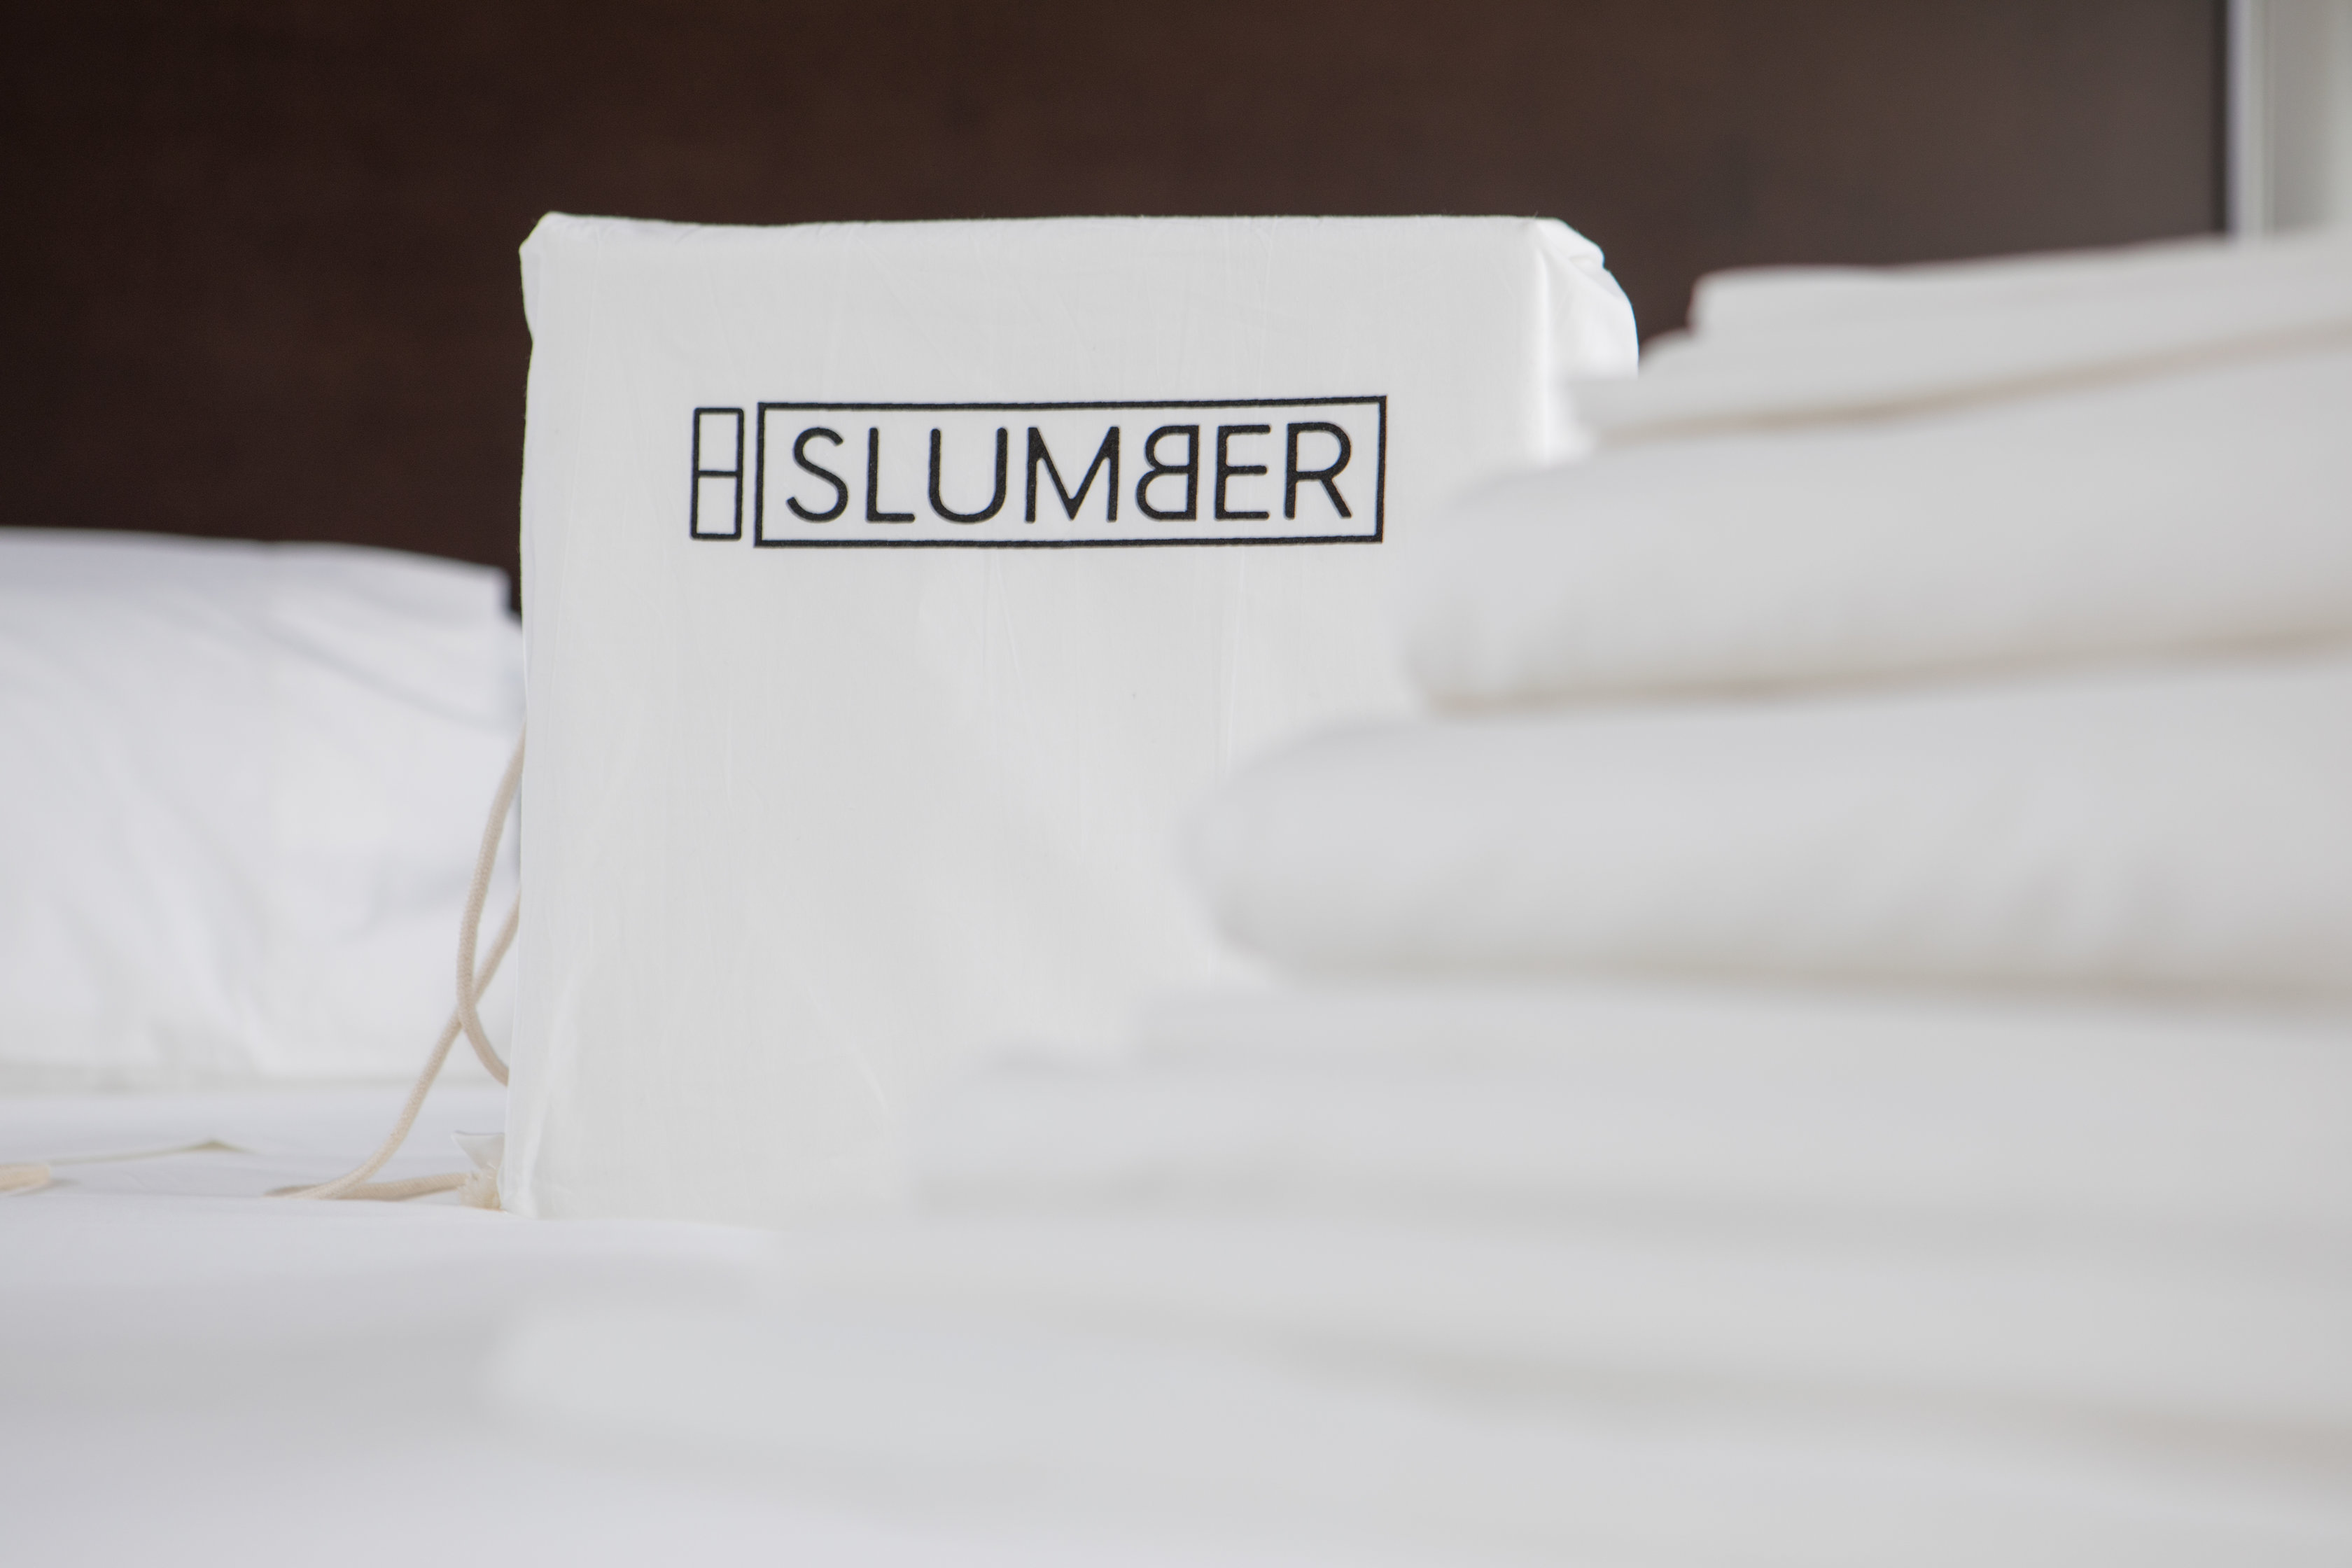 Slumber Sheets Luxury Bed Sheets At An Unbeatable Price Launches On Kickstarter